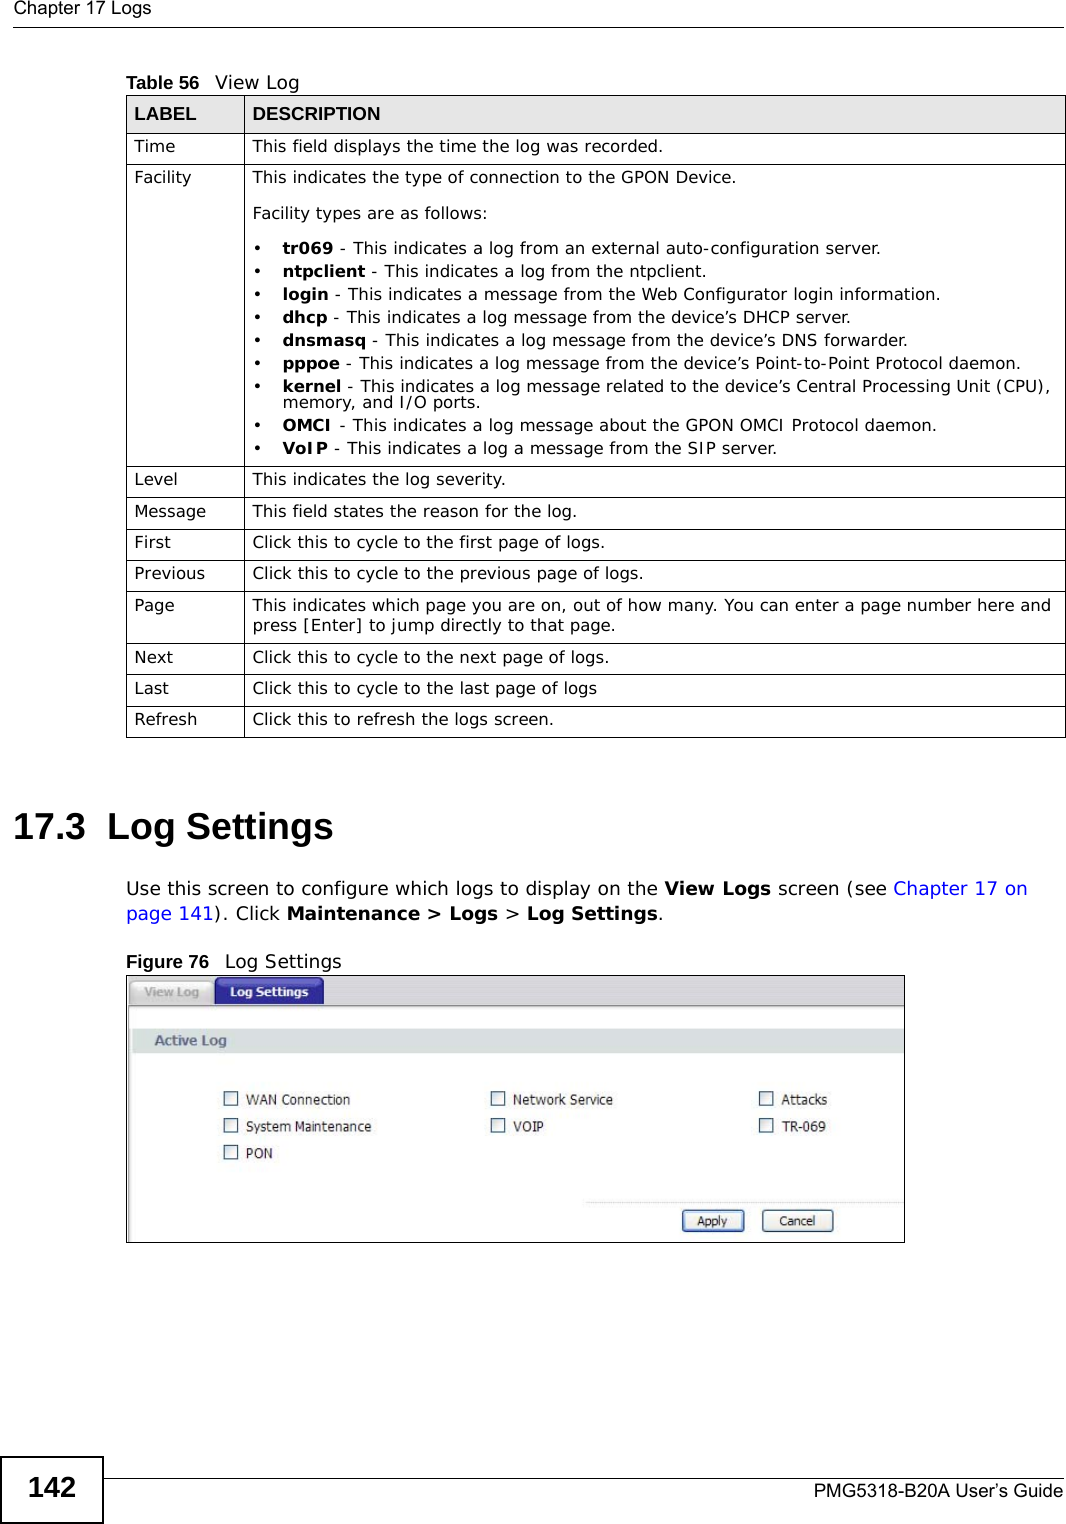 Chapter 17 LogsPMG5318-B20A User’s Guide14217.3  Log Settings Use this screen to configure which logs to display on the View Logs screen (see Chapter 17 on page 141). Click Maintenance &gt; Logs &gt; Log Settings.Figure 76   Log SettingsTime  This field displays the time the log was recorded. Facility This indicates the type of connection to the GPON Device.Facility types are as follows:•tr069 - This indicates a log from an external auto-configuration server.•ntpclient - This indicates a log from the ntpclient.•login - This indicates a message from the Web Configurator login information.•dhcp - This indicates a log message from the device’s DHCP server.•dnsmasq - This indicates a log message from the device’s DNS forwarder.•pppoe - This indicates a log message from the device’s Point-to-Point Protocol daemon.•kernel - This indicates a log message related to the device’s Central Processing Unit (CPU), memory, and I/O ports.•OMCI - This indicates a log message about the GPON OMCI Protocol daemon.•VoIP - This indicates a log a message from the SIP server.Level This indicates the log severity.Message This field states the reason for the log.First Click this to cycle to the first page of logs.Previous Click this to cycle to the previous page of logs.Page This indicates which page you are on, out of how many. You can enter a page number here and press [Enter] to jump directly to that page.Next Click this to cycle to the next page of logs.Last Click this to cycle to the last page of logsRefresh Click this to refresh the logs screen.Table 56   View LogLABEL DESCRIPTION